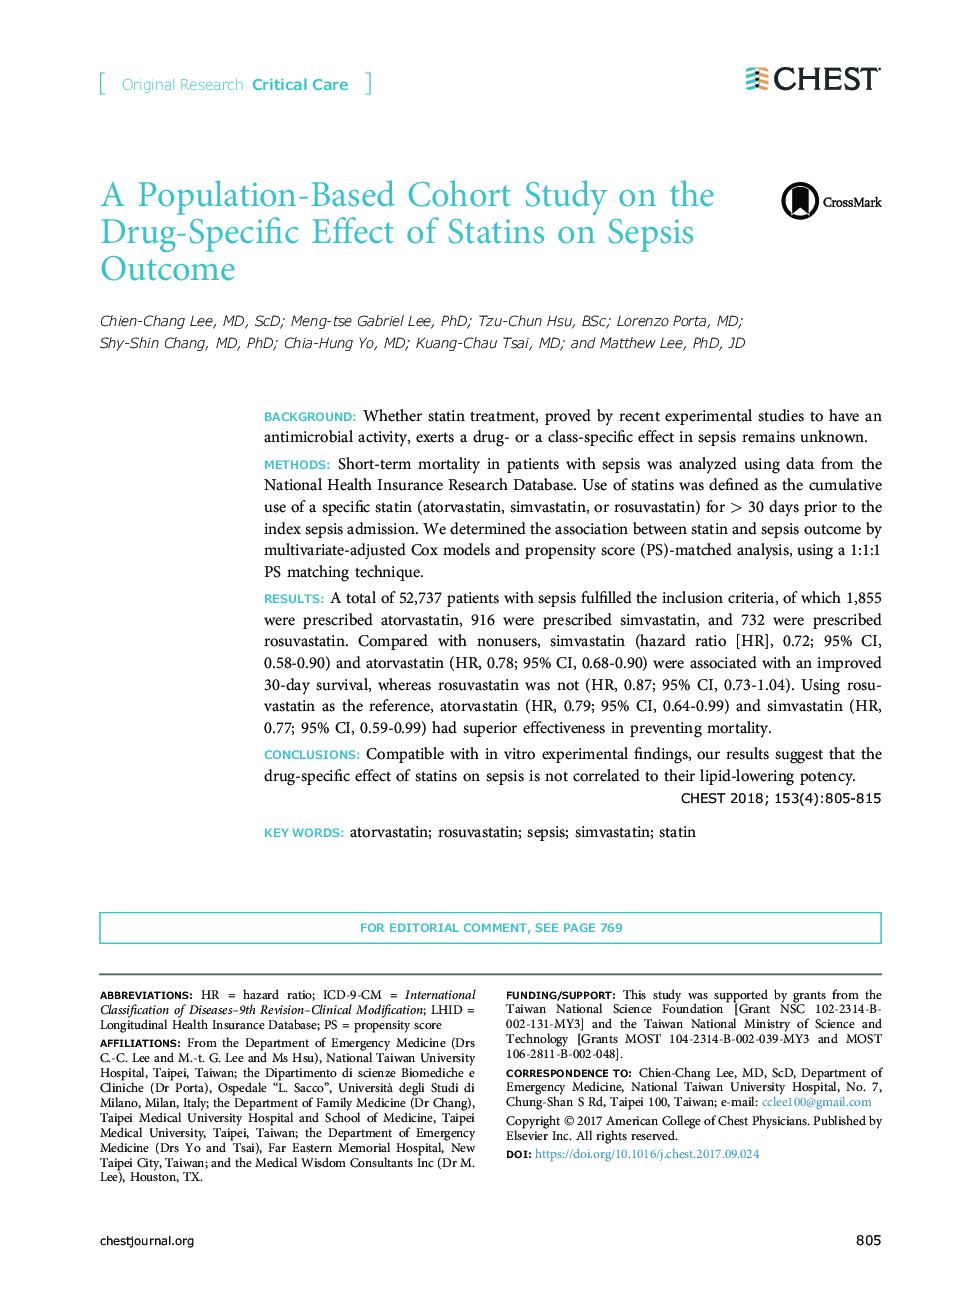 A Population-Based Cohort Study on the Drug-Specific Effect of Statins on Sepsis Outcome